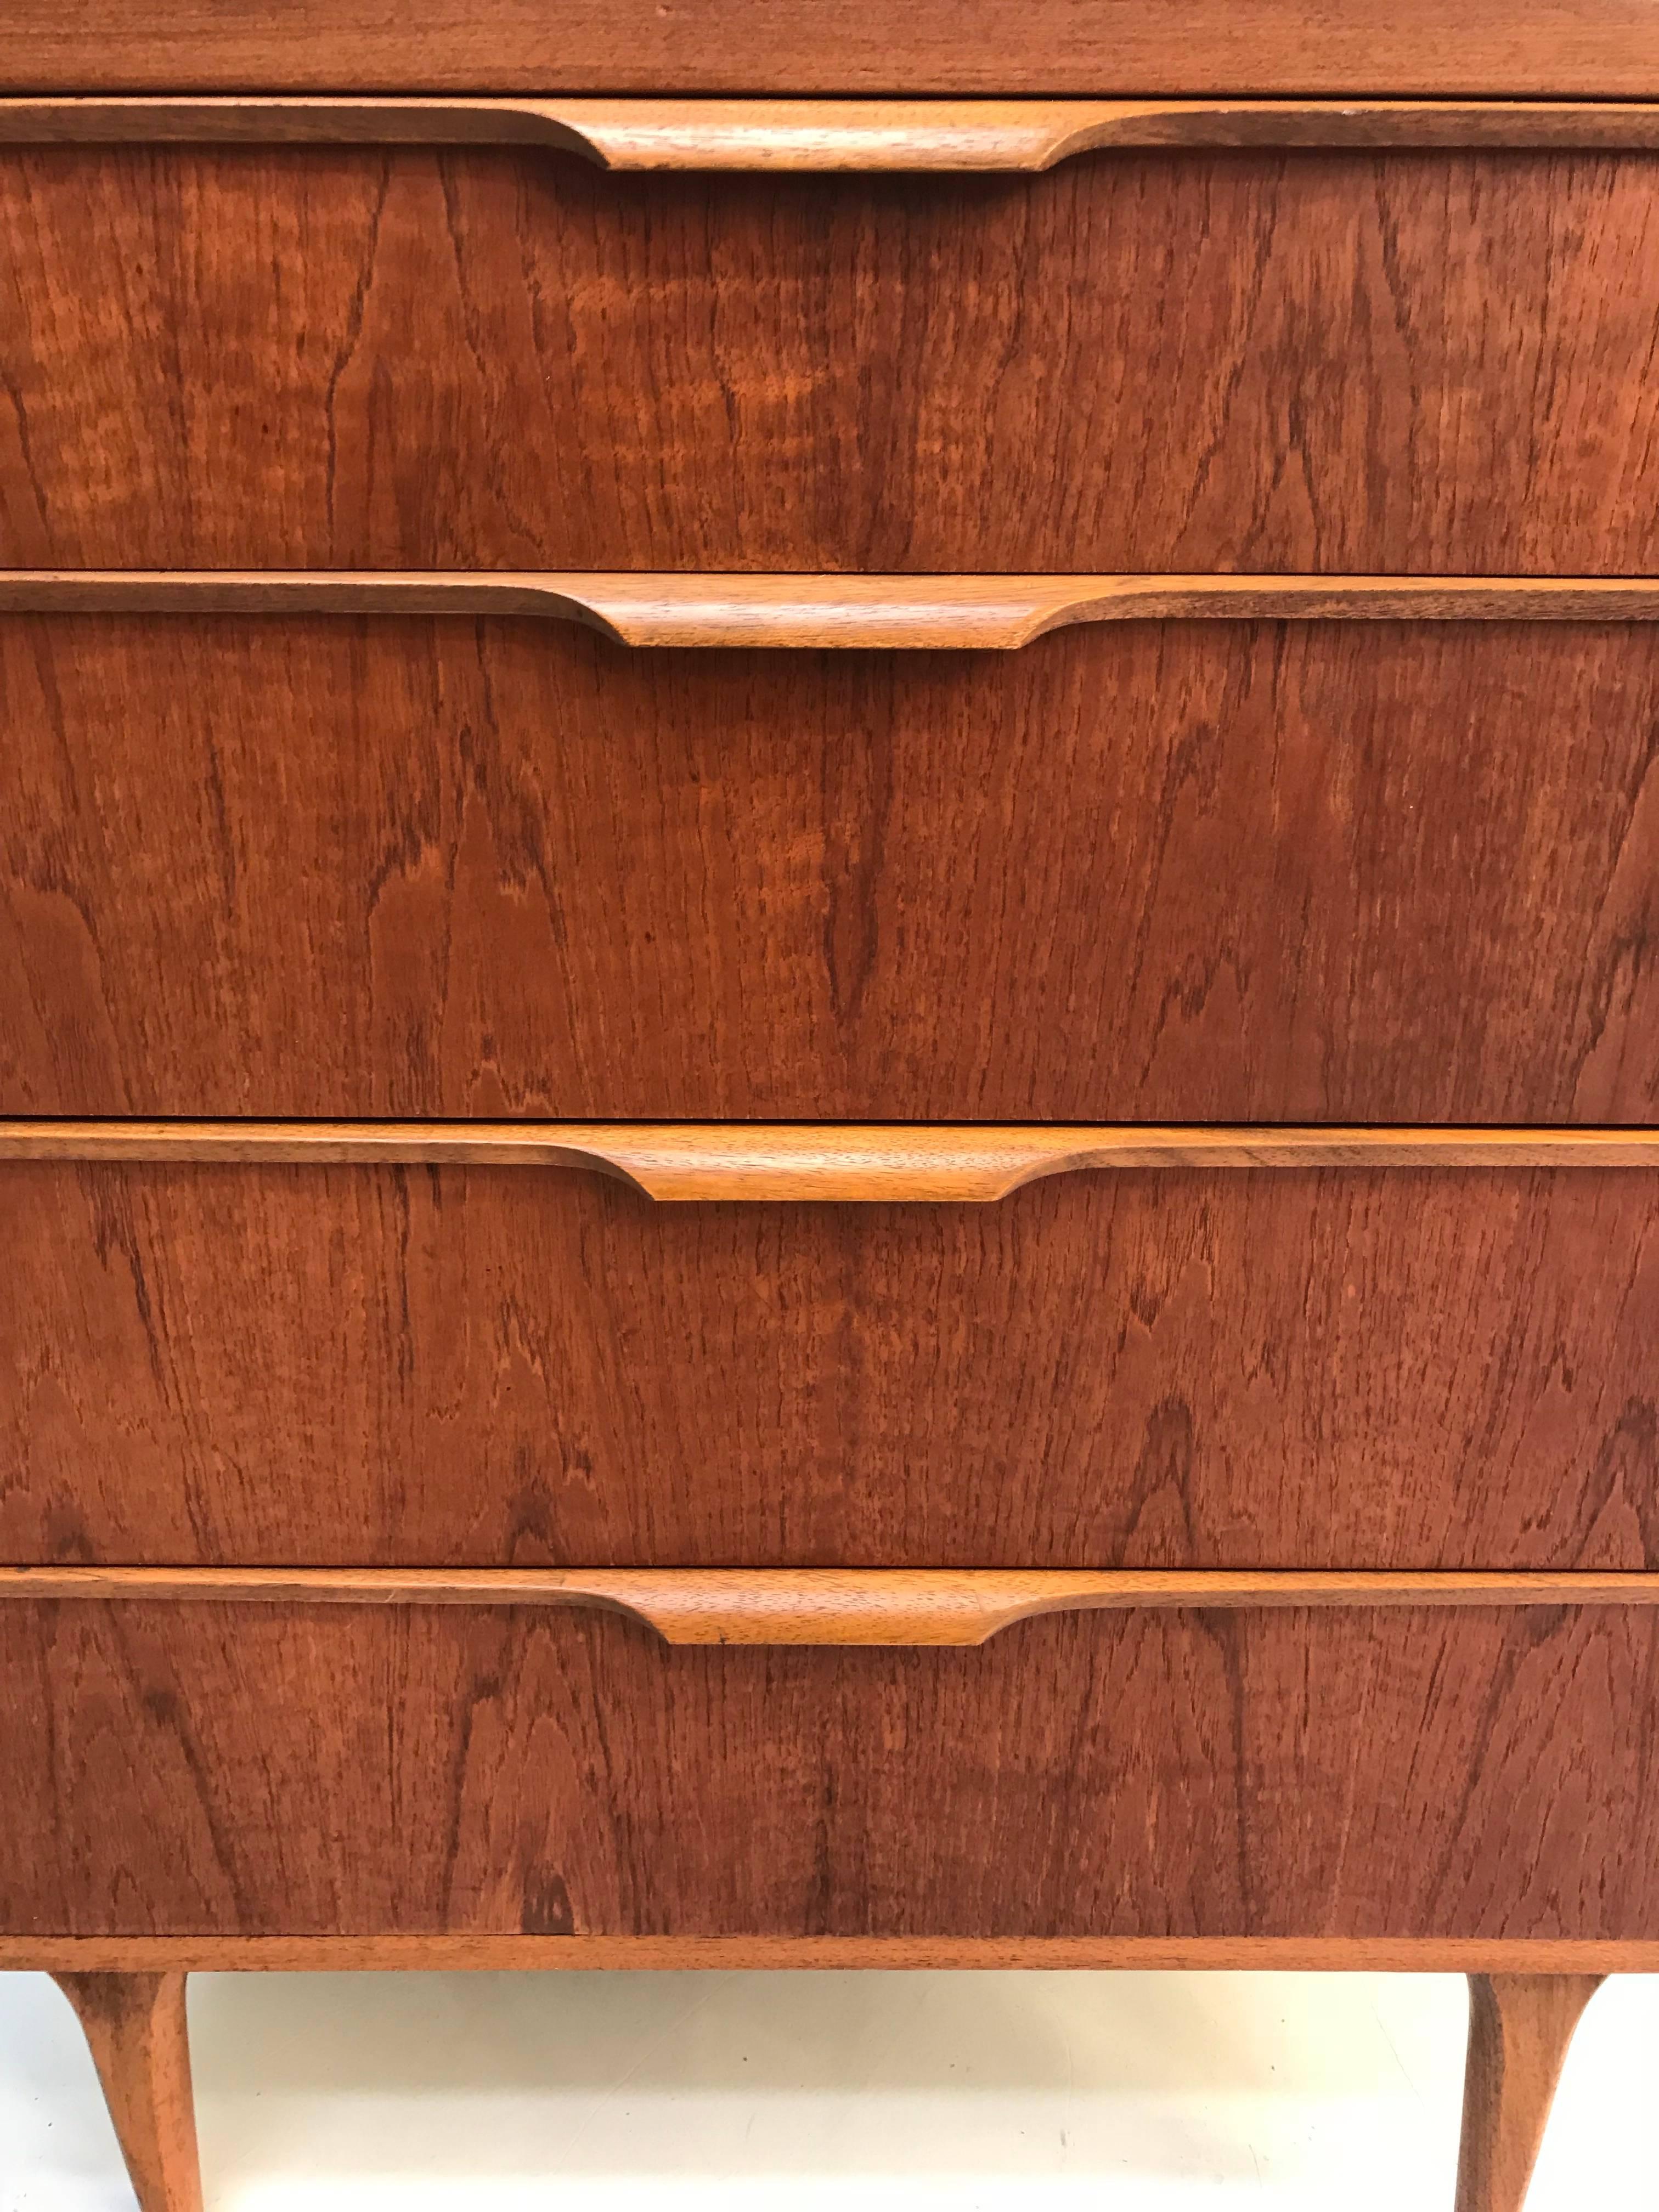 Stunning teak four-drawer enfilade by Austinsuite made in England design by Franck Guille in the sixties.
Condition: very good
Measurements:
76cm W/91.5 cm H/42 cm D

Itemnumber: 237.